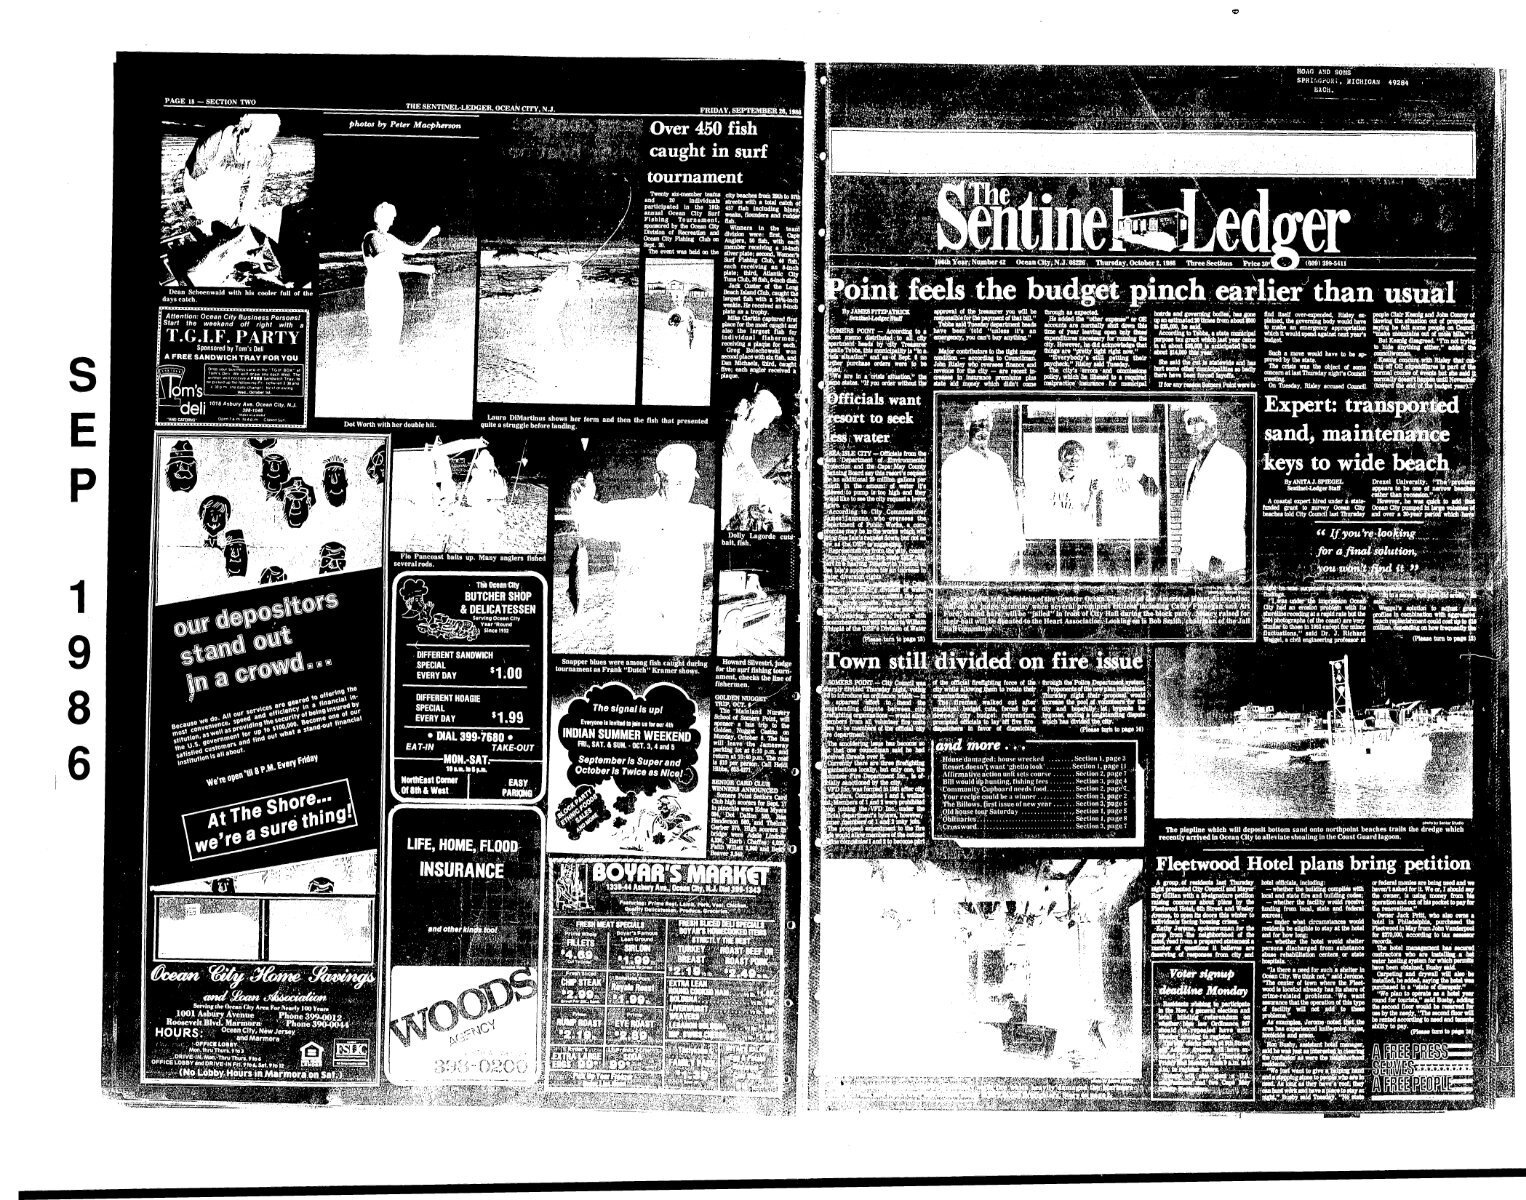 County Ocean of Archives Newspaper 1986 Oct -